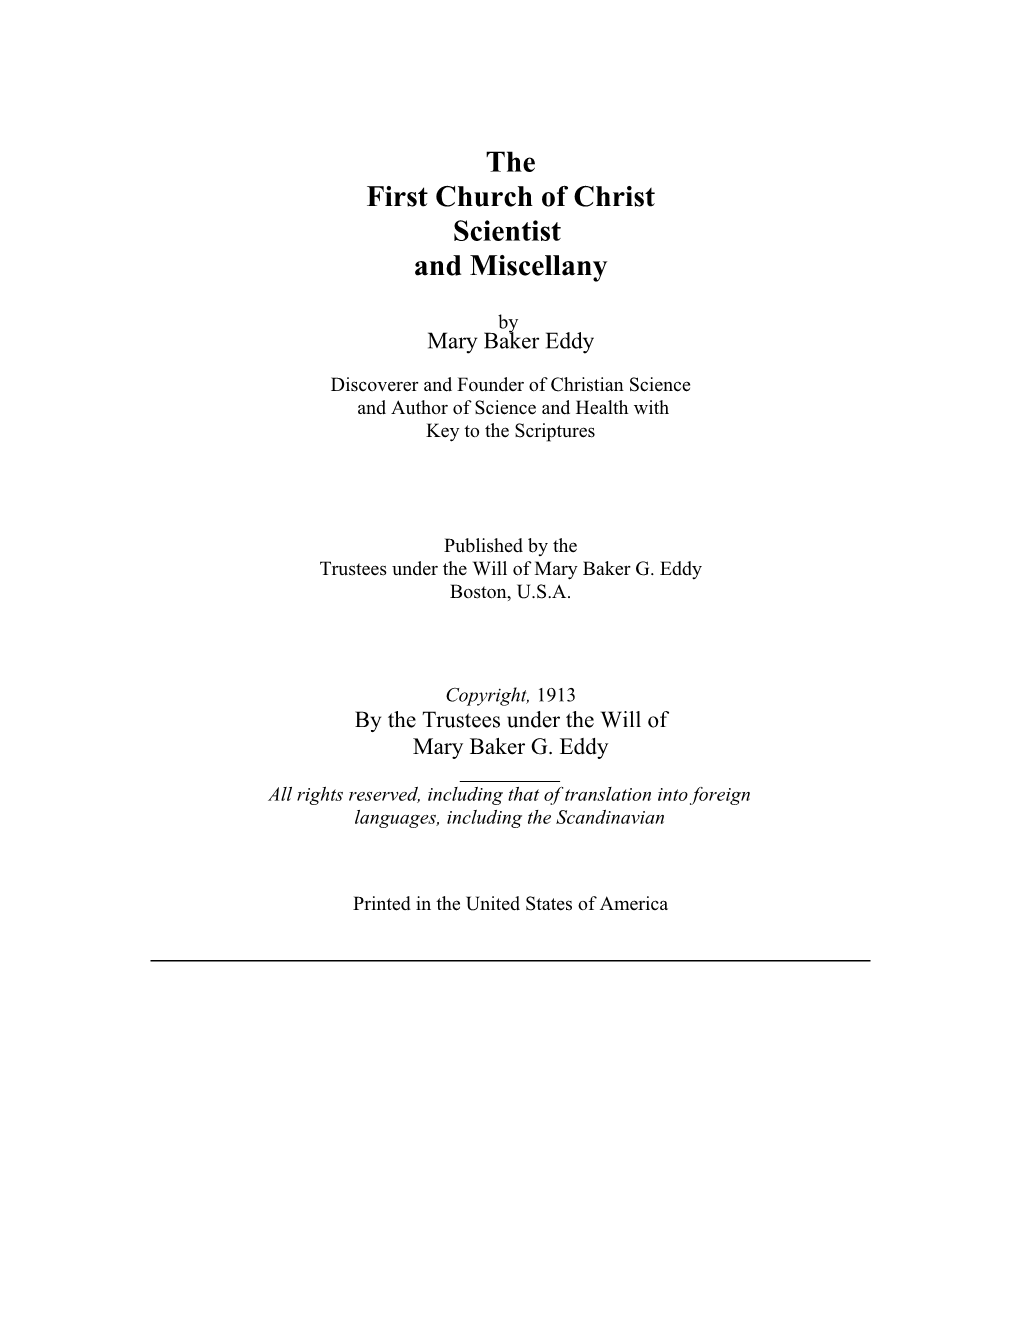 The First Church of Christ, Scientist and Miscellany